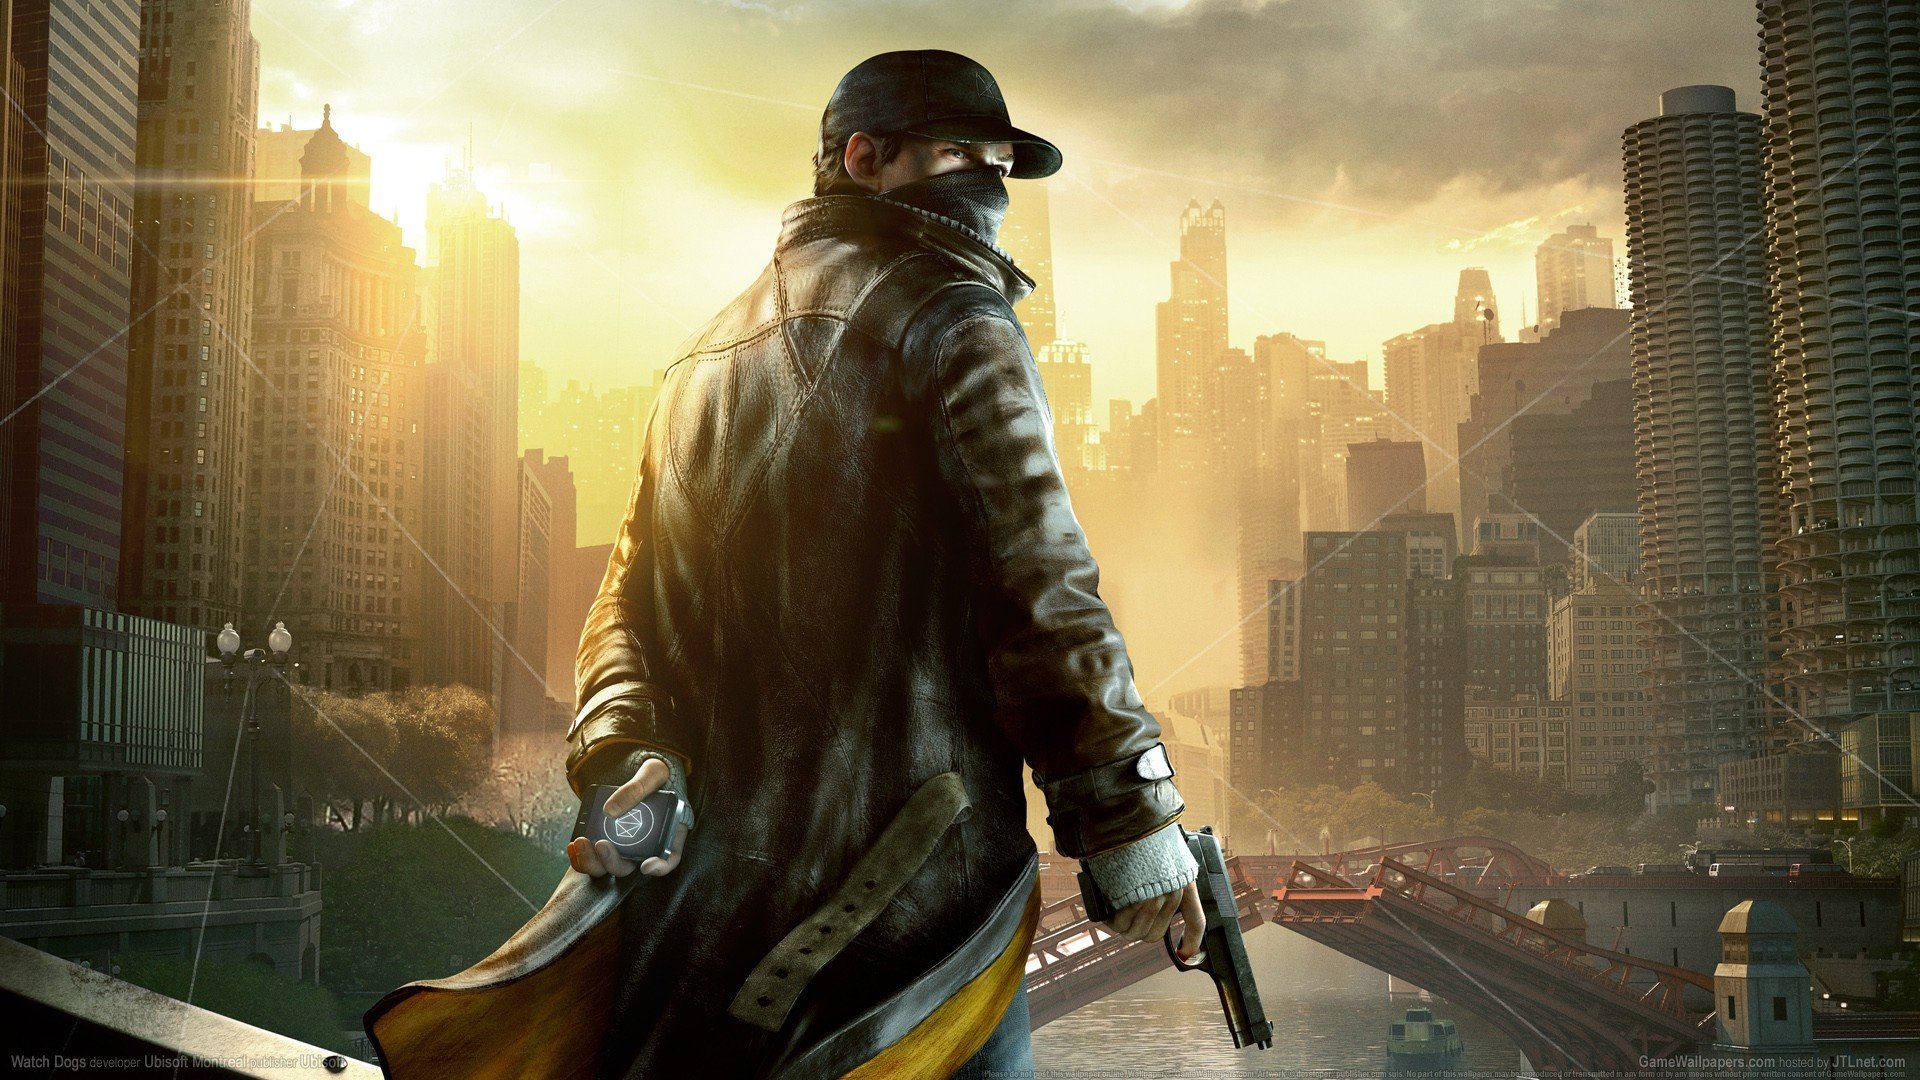 Free Download Watch Dogs Wallpaper Id - Aiden Pearce Wallpaper Watch Dogs -  1920x1080 Wallpaper 